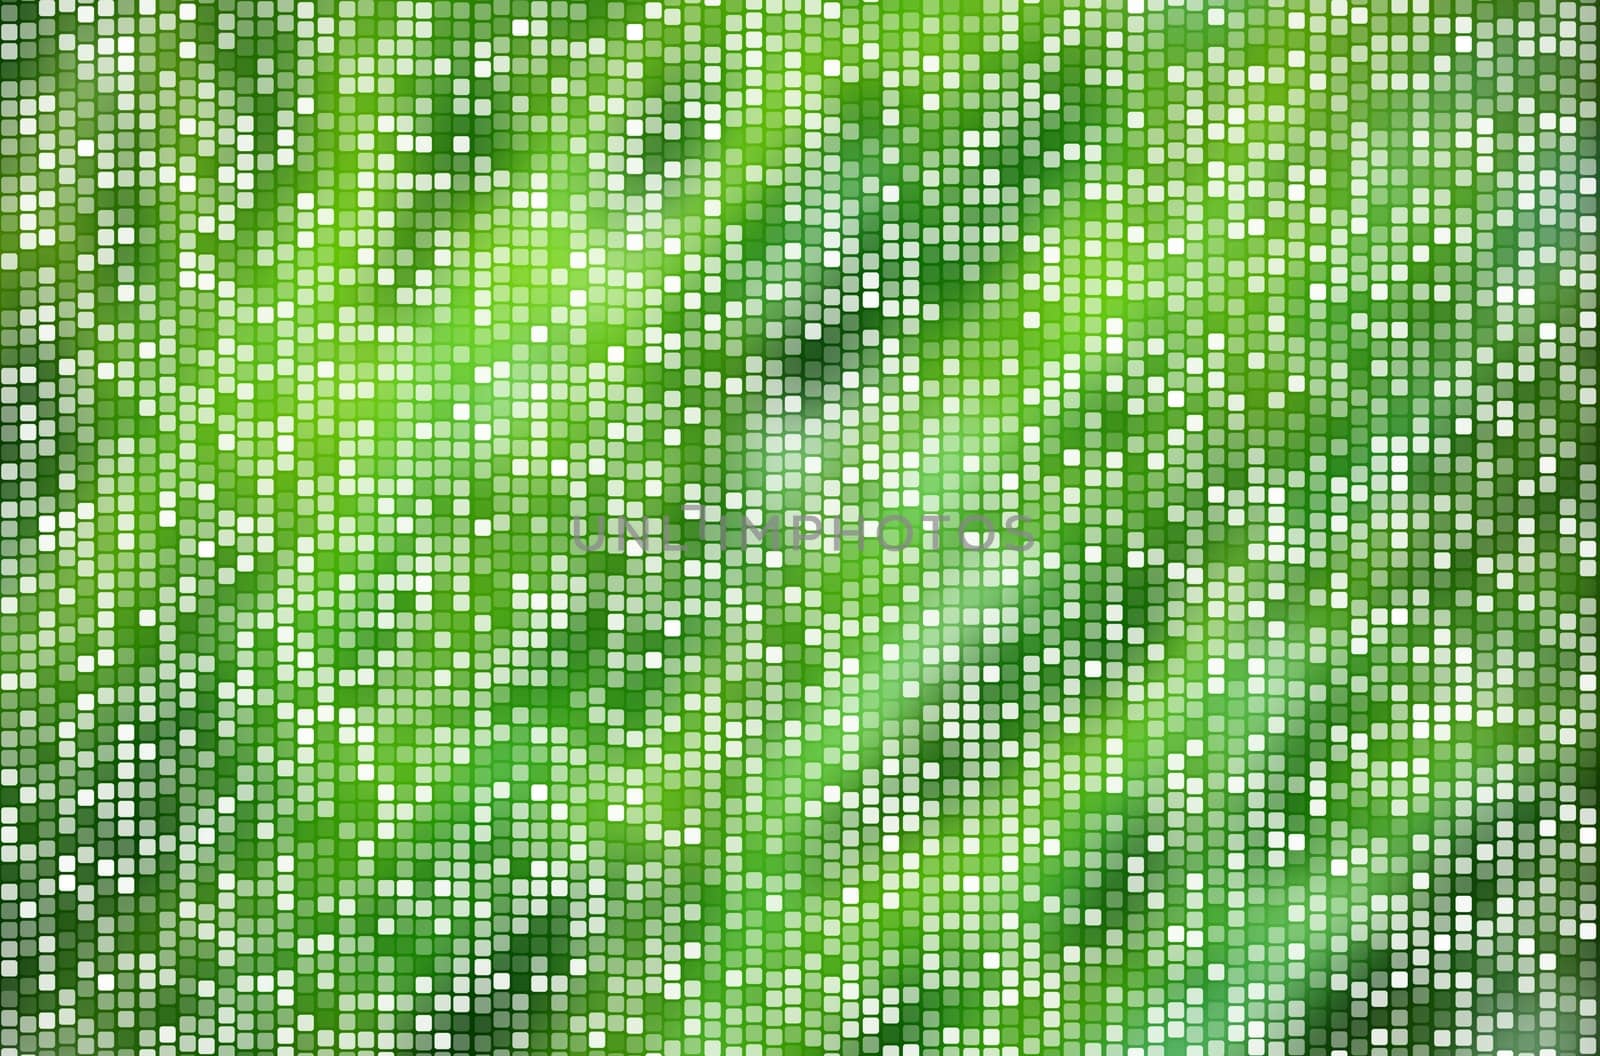 abstract square polka dots on green background by a3701027